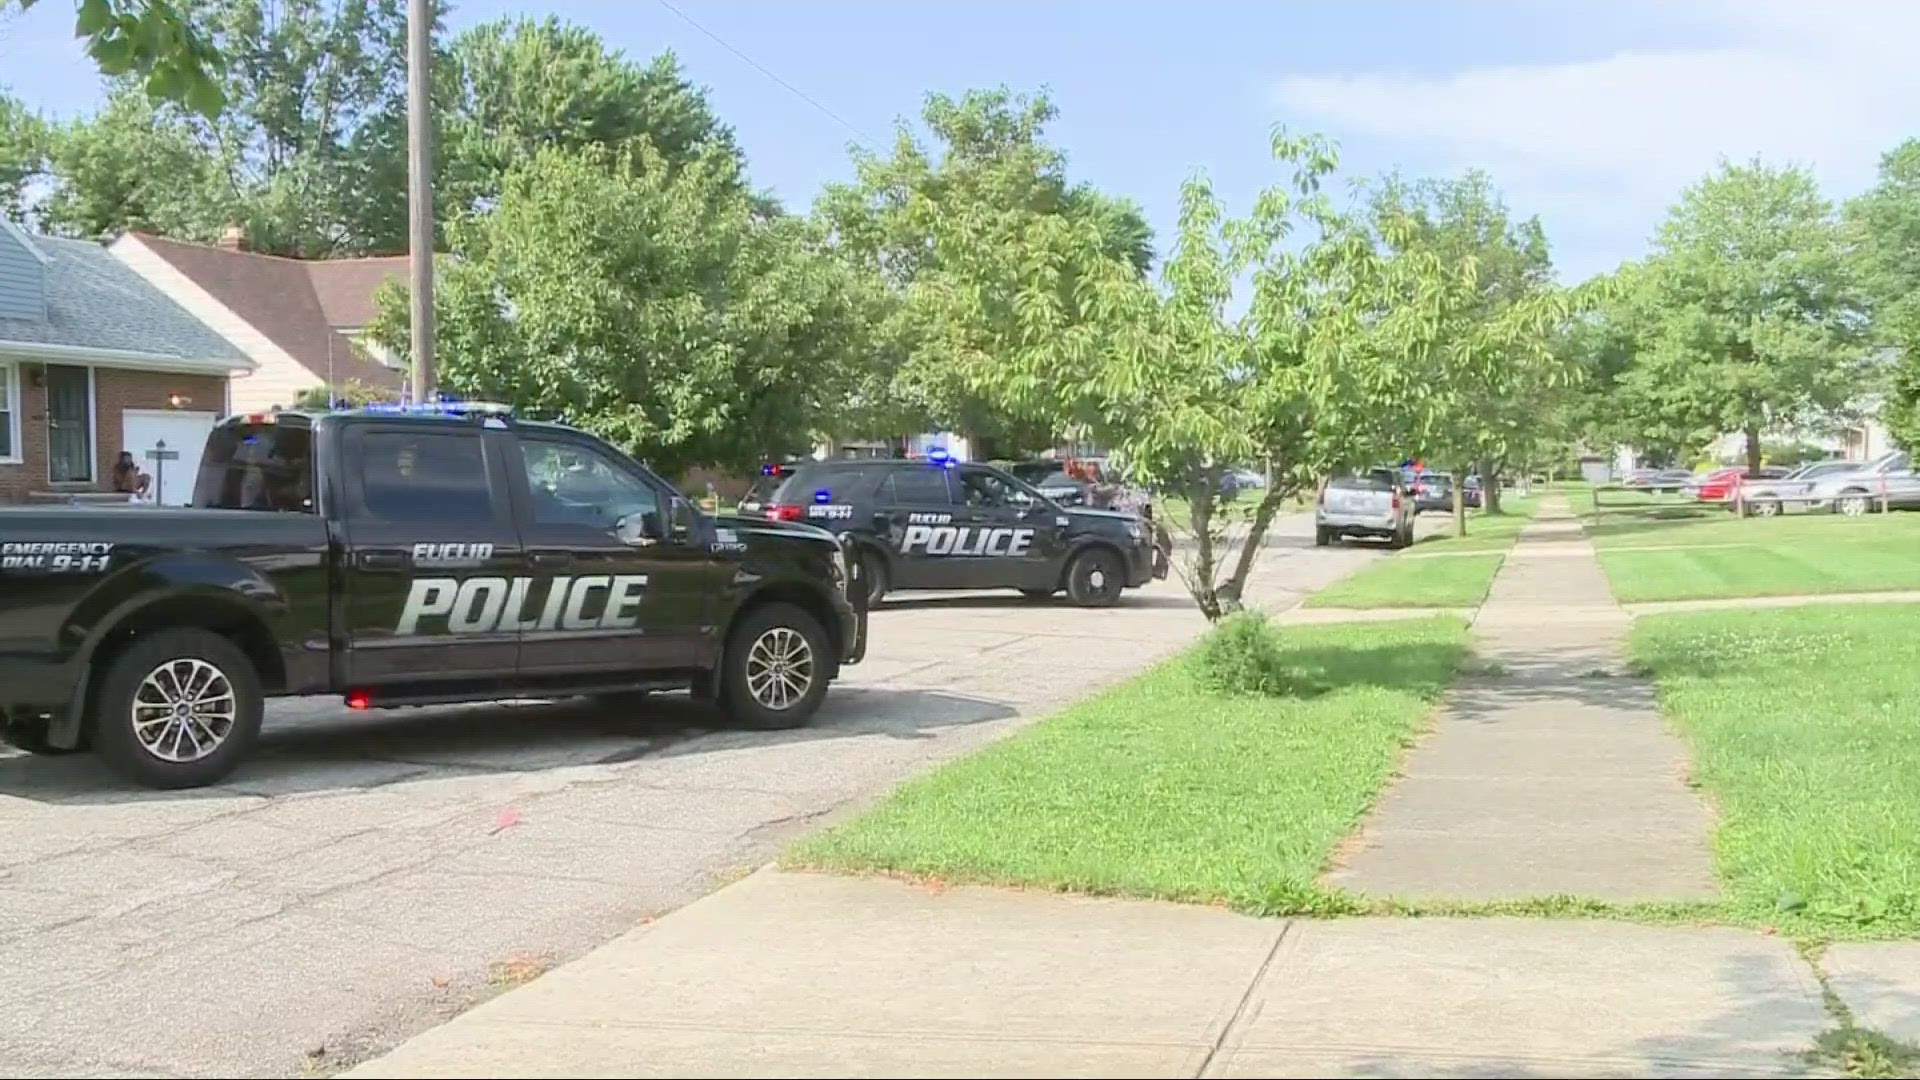 Police in Euclid are investigating after they say a 10-year-old girl was shot on Monday.